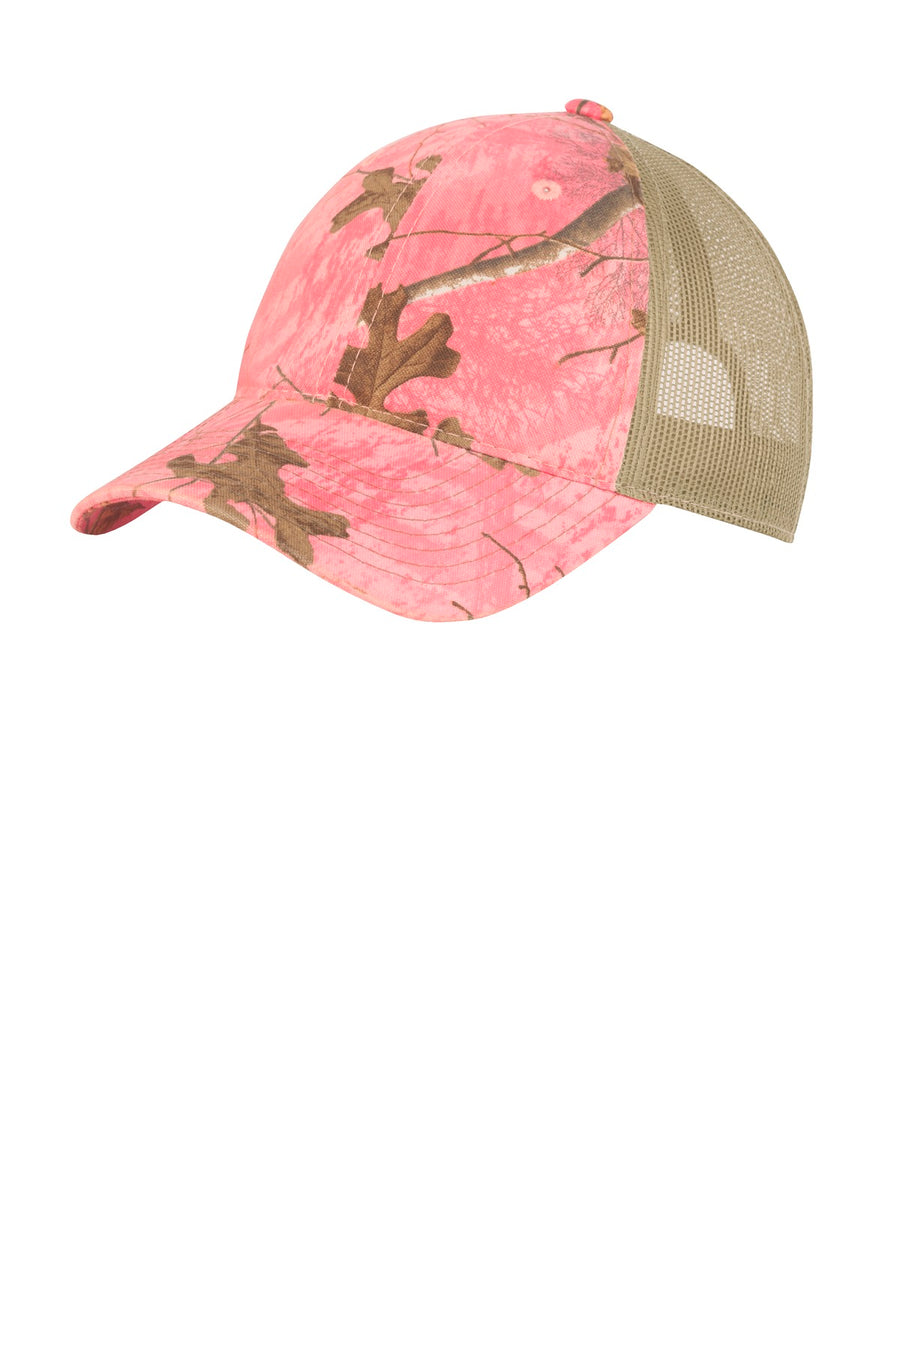 Port Authority Unstructured Camouflage Mesh Back Cap.